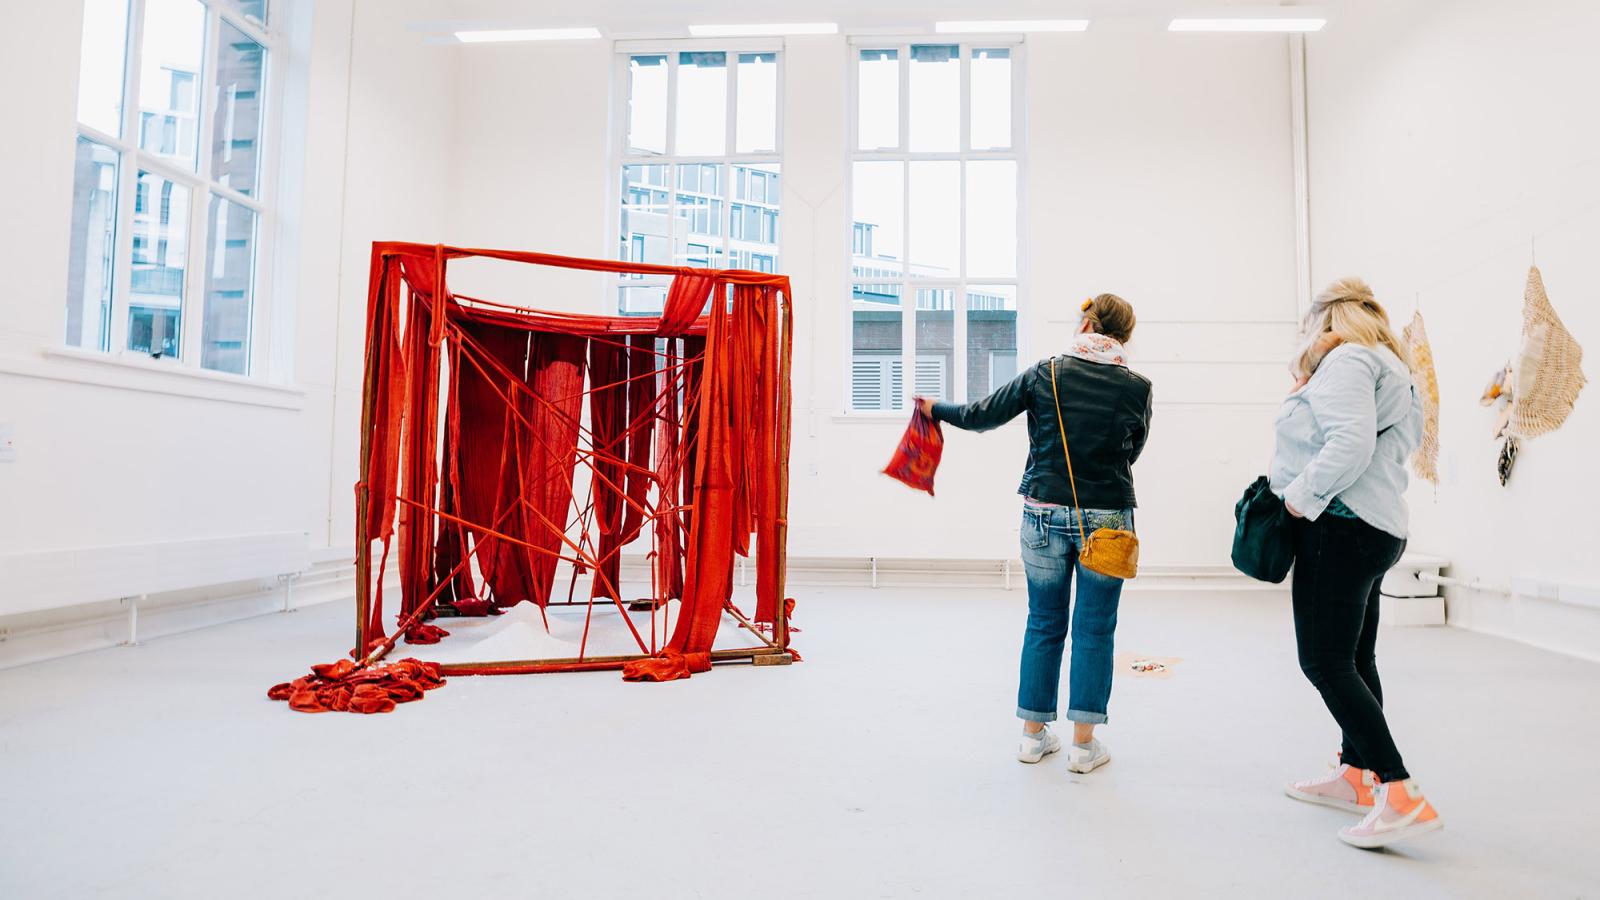 Two visitors to the June 2023 Graduate Show are looking at a large red textile installation in a white studio with large windows.